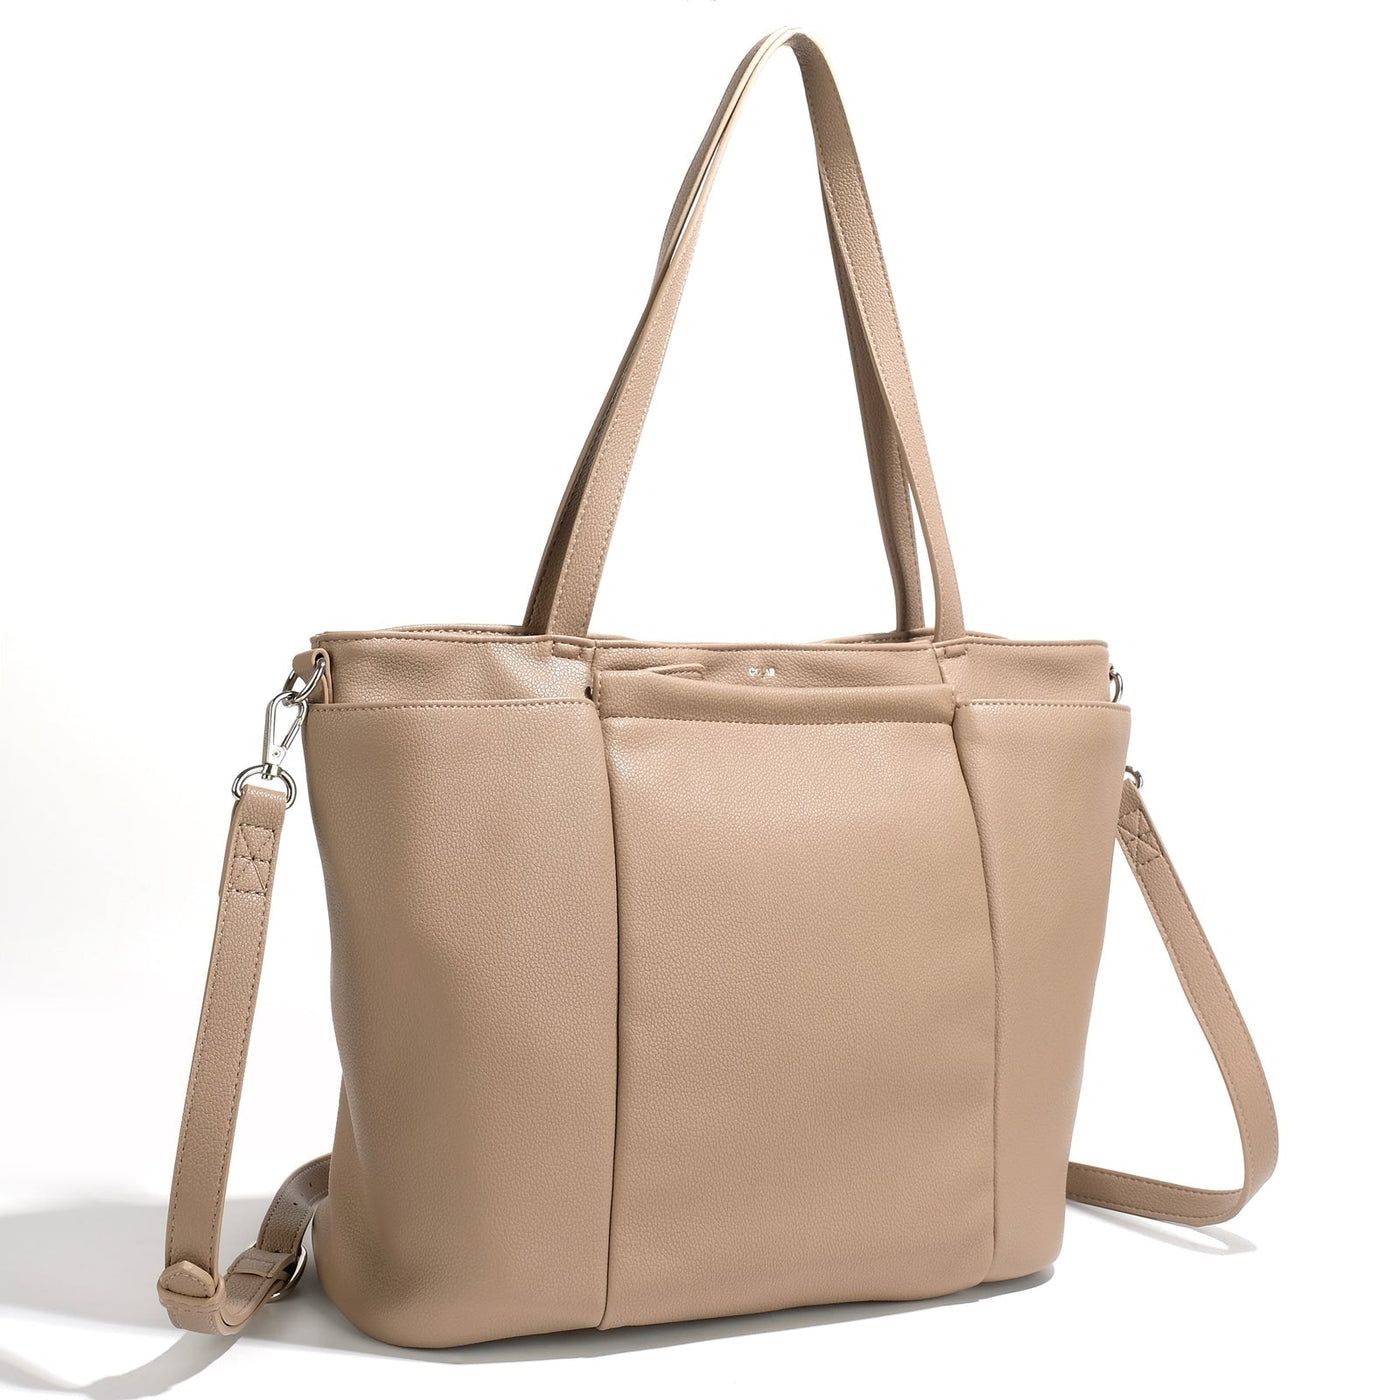 The ‘Every Tote’ Holdall tote - mink - Blue Sky Clothing & Lingerie